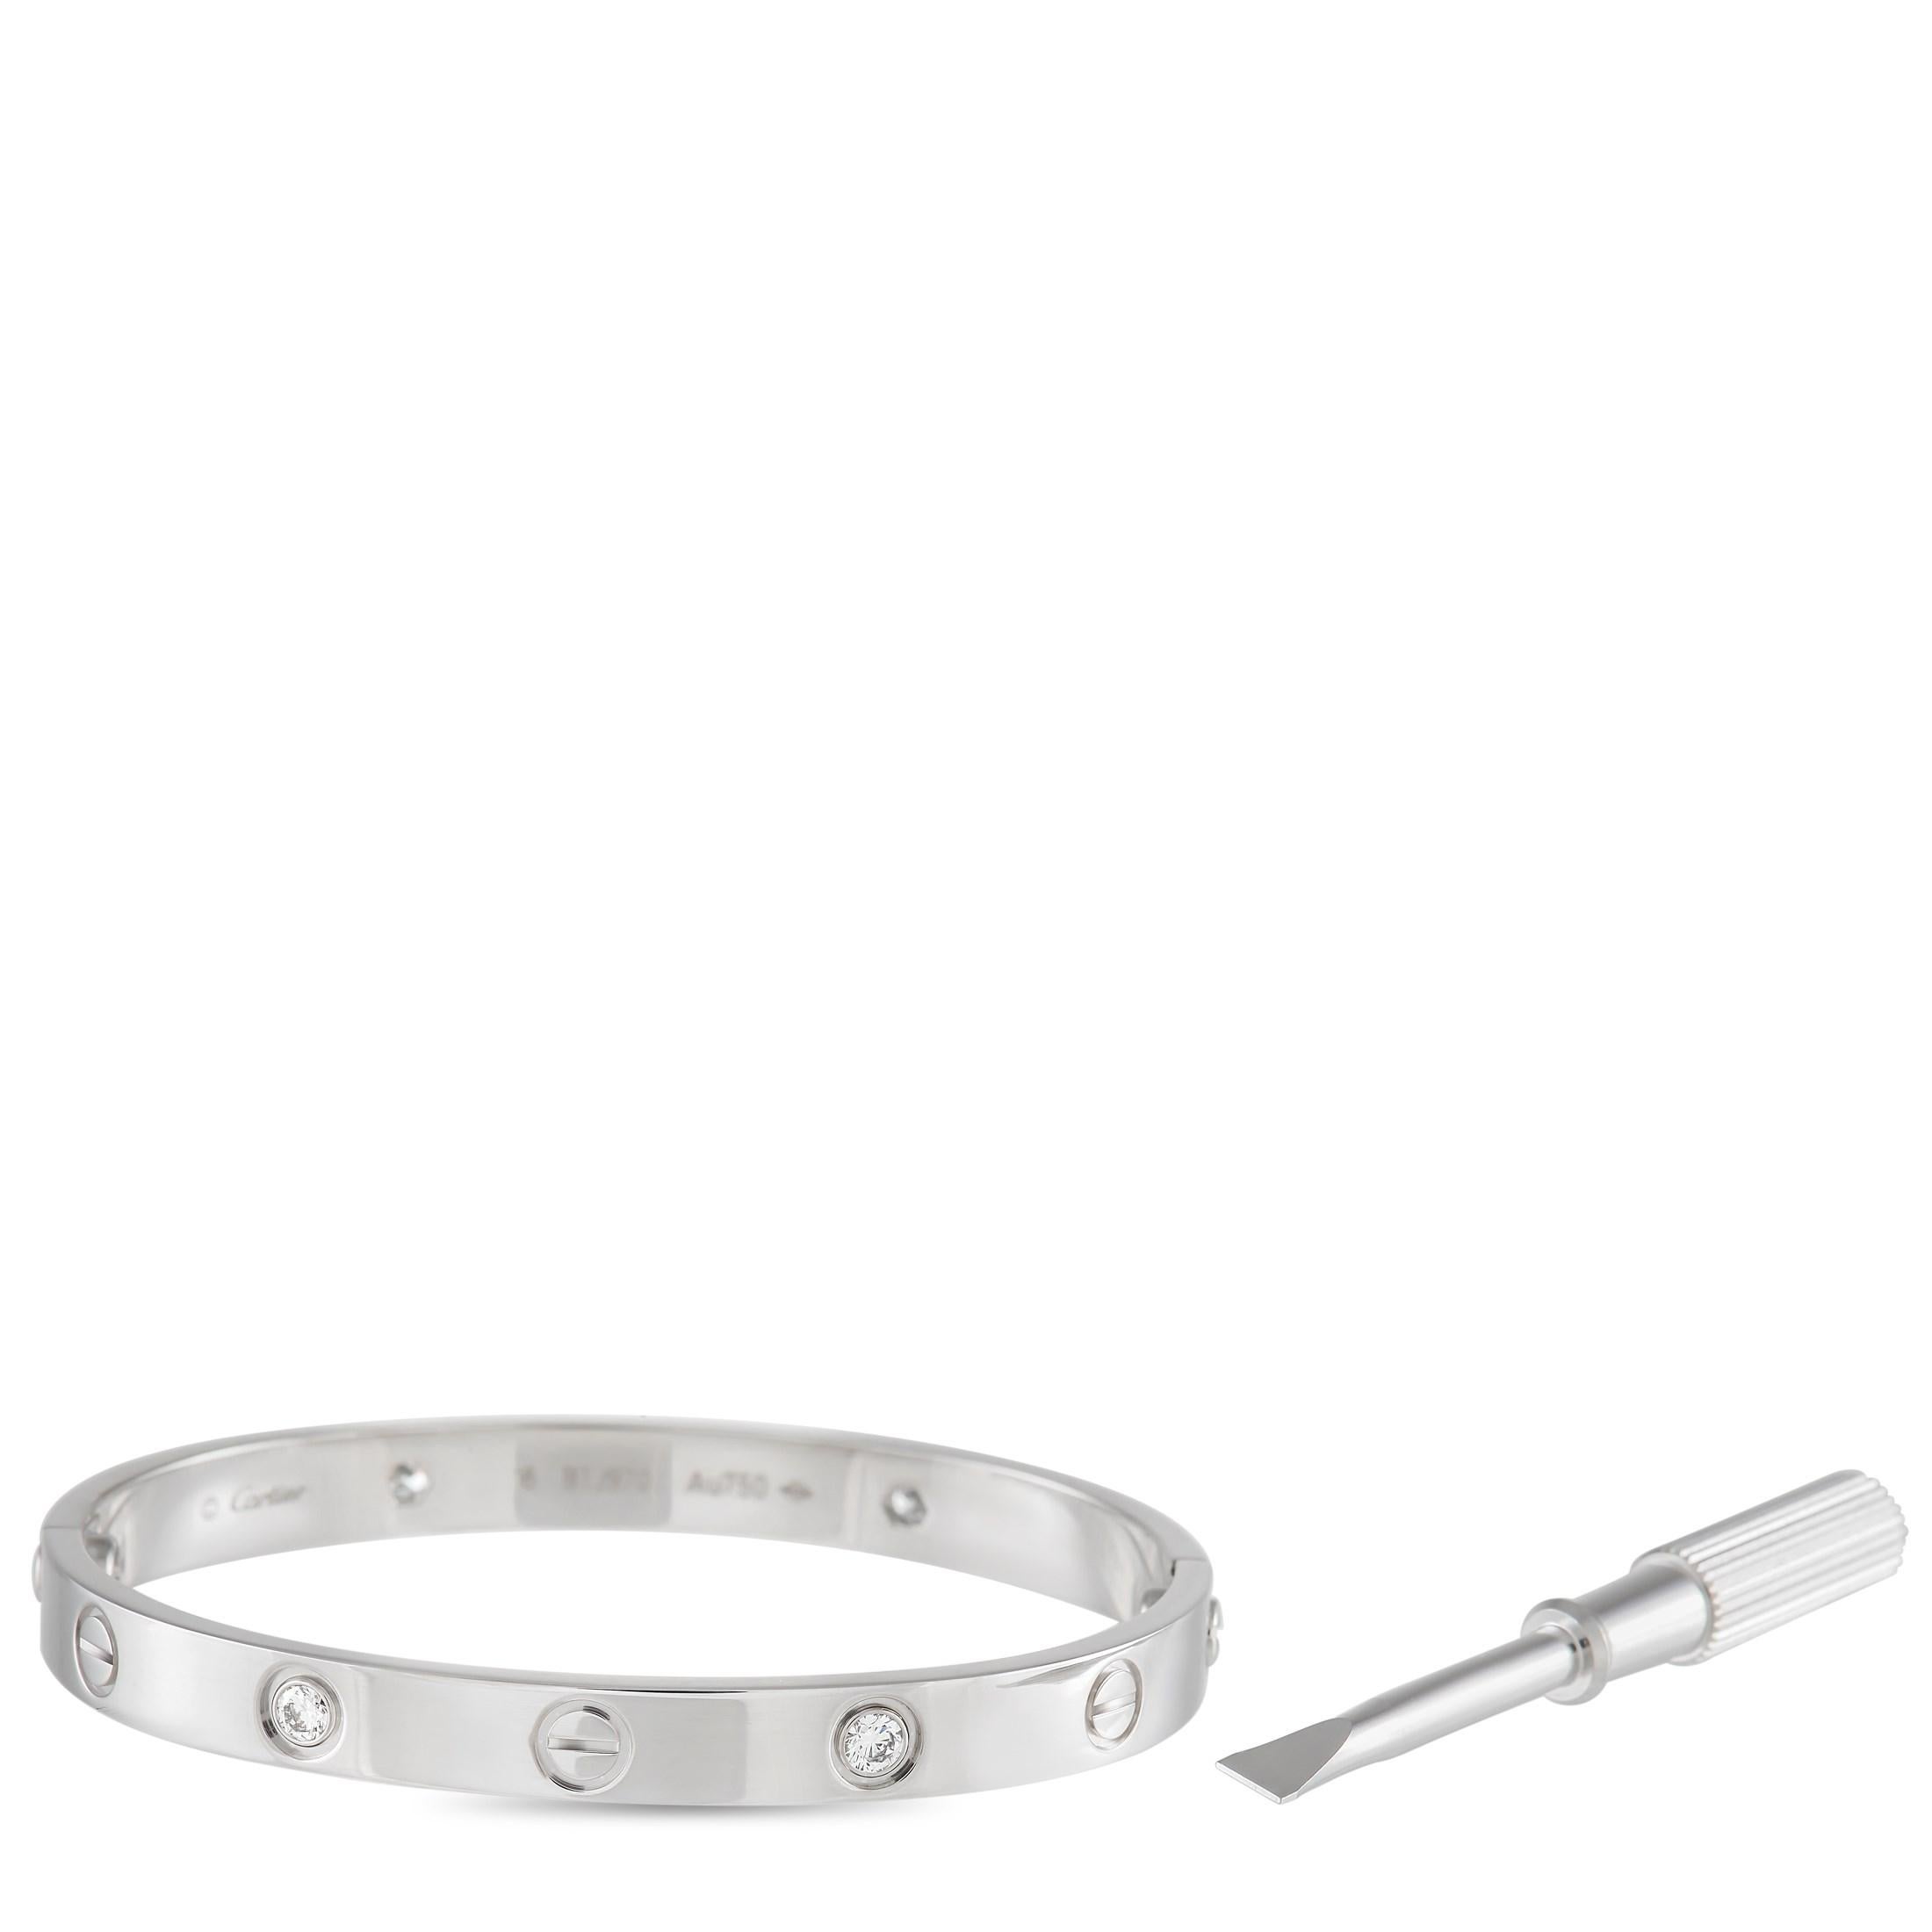 This close-fitting rigid bracelet is an icon of jewelry design. From Cartier, the Love Bracelet is deemed as a symbol of not just love but also loyalty, art, and innovation. it features two arcs worn on the wrist and can only be removed by using a